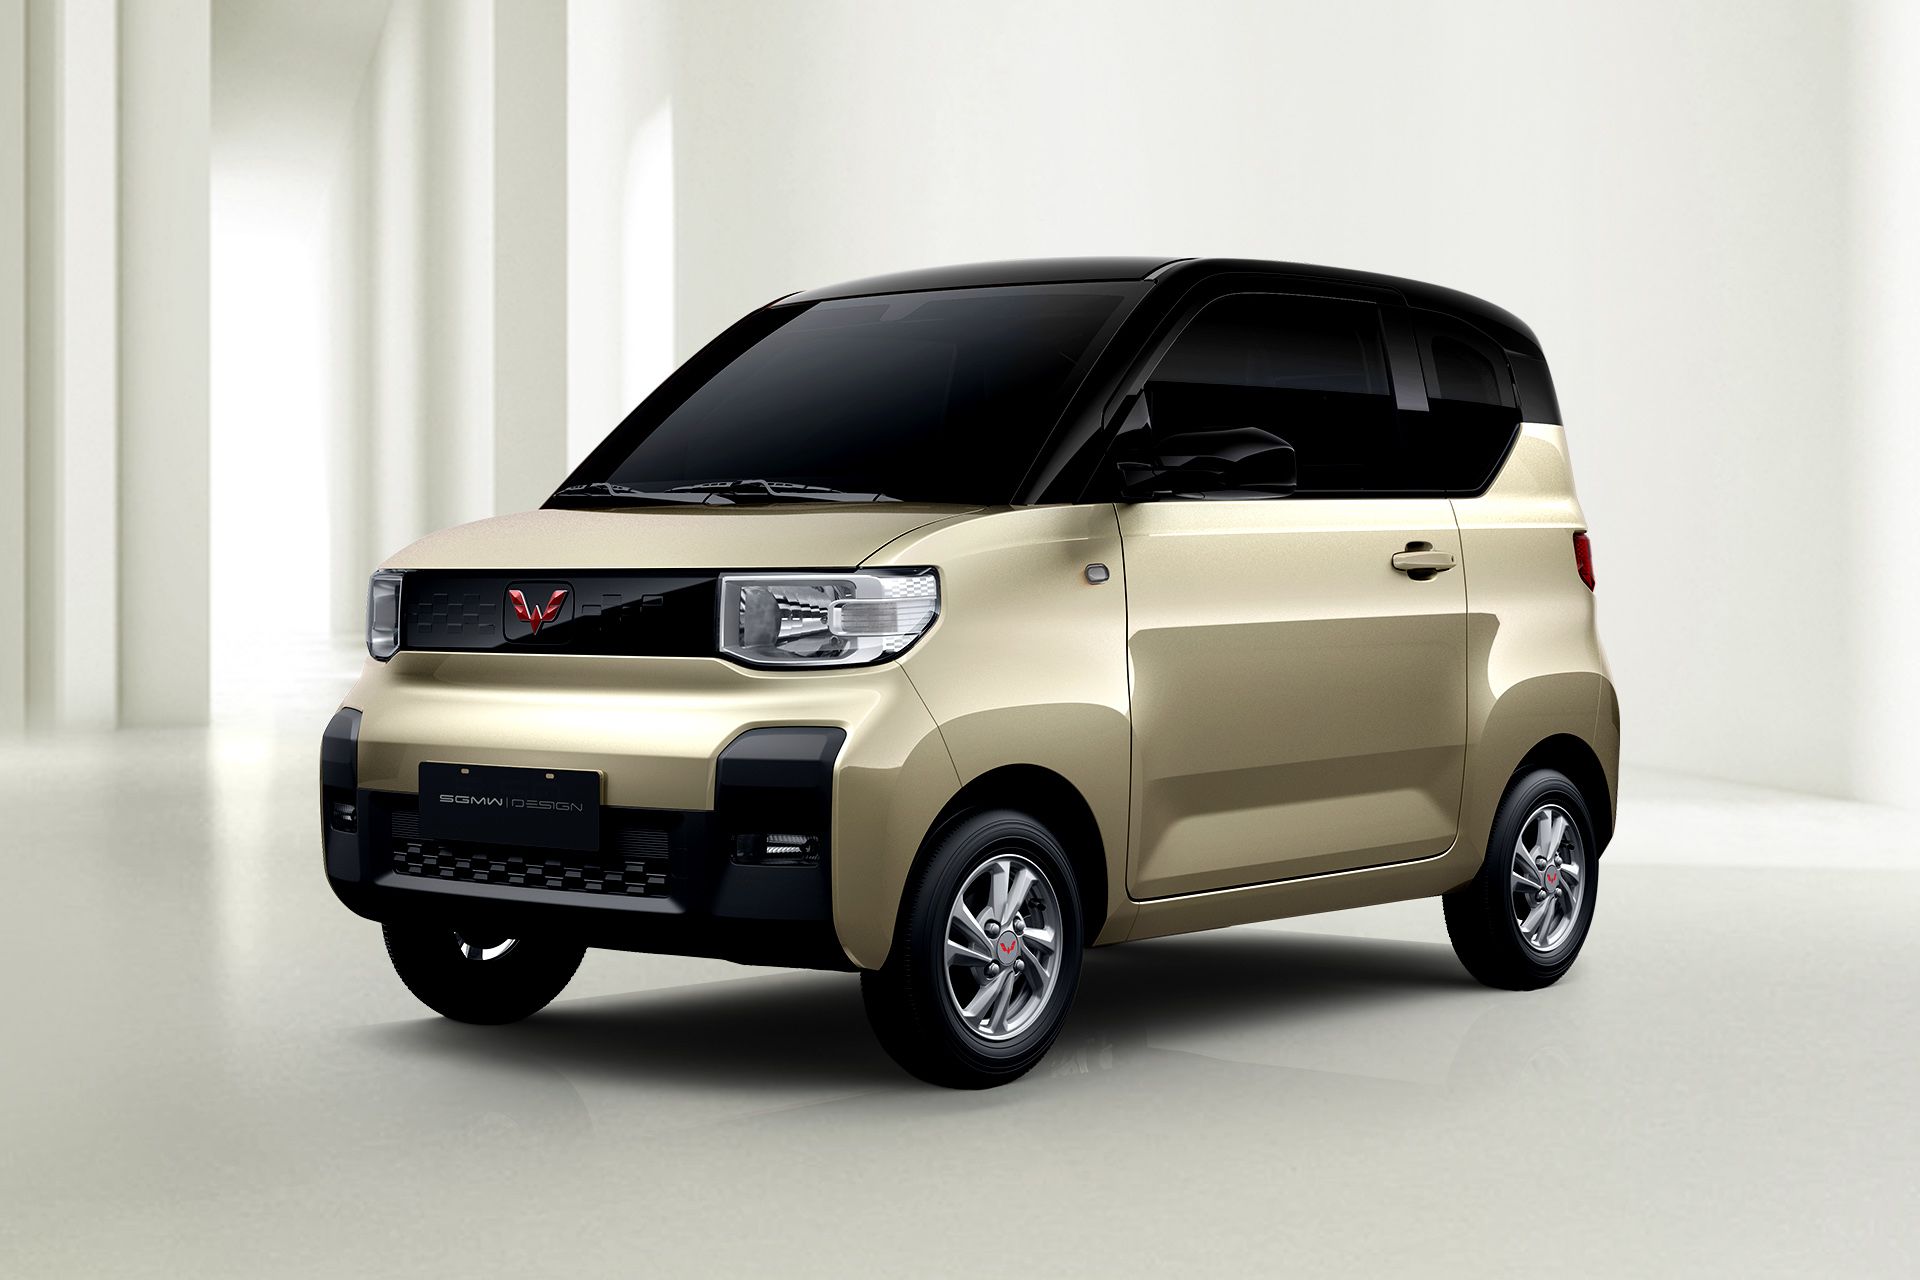 GM’s Latest EV Comes From China’s Wuling, Takes Inspiration From Kei